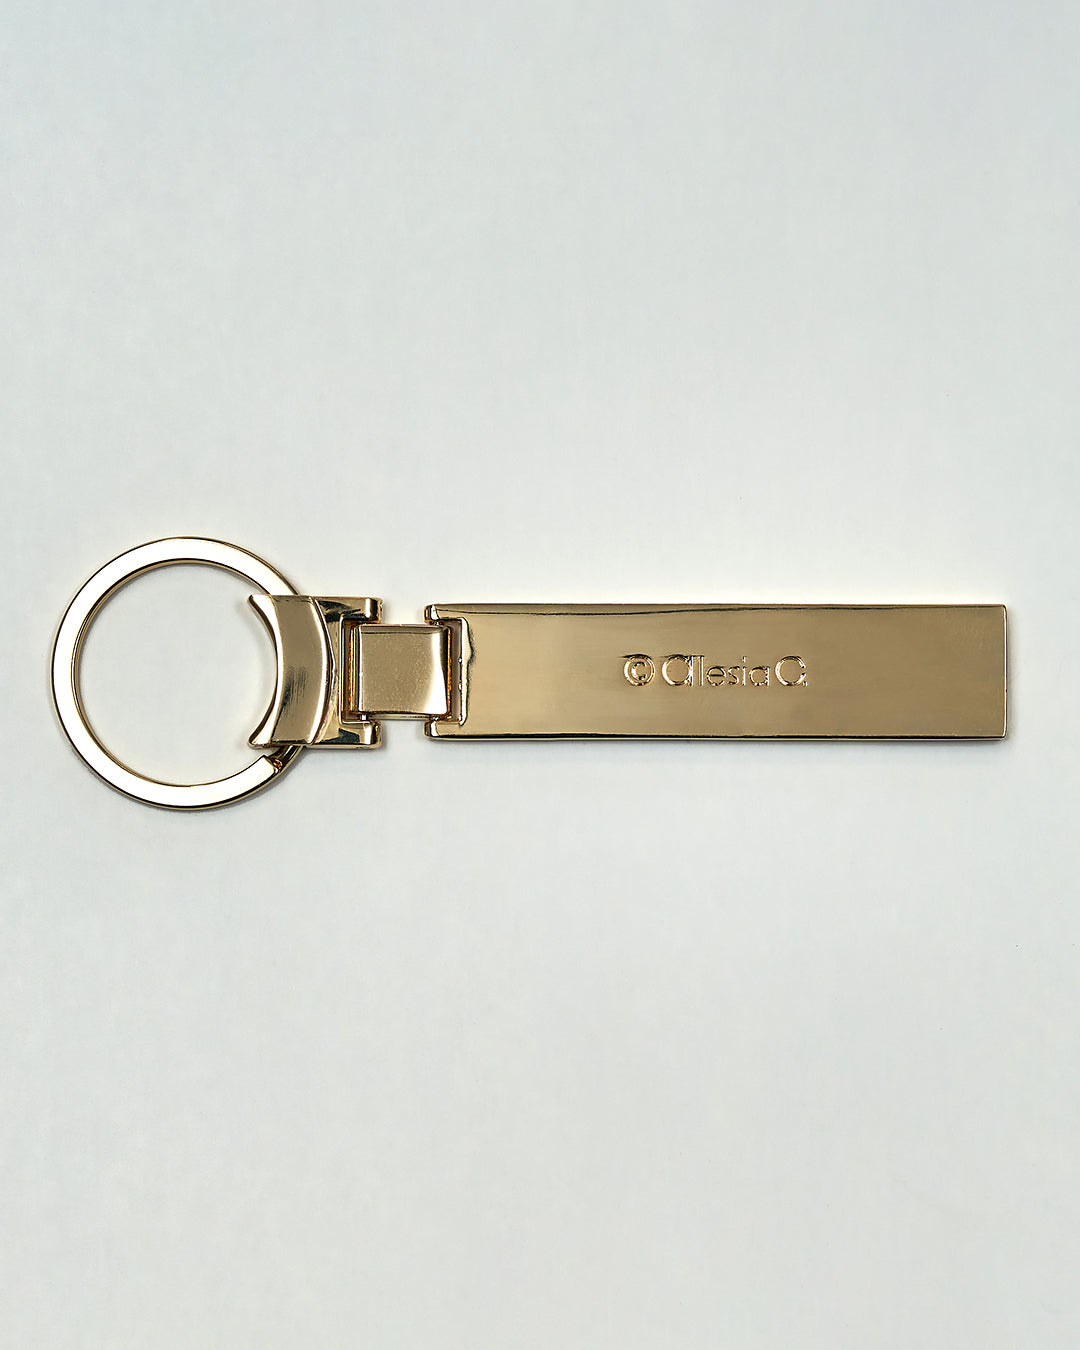 CHICAGO Skyline Pencil Art Key Chain Ring Gold by Alesia Chaika